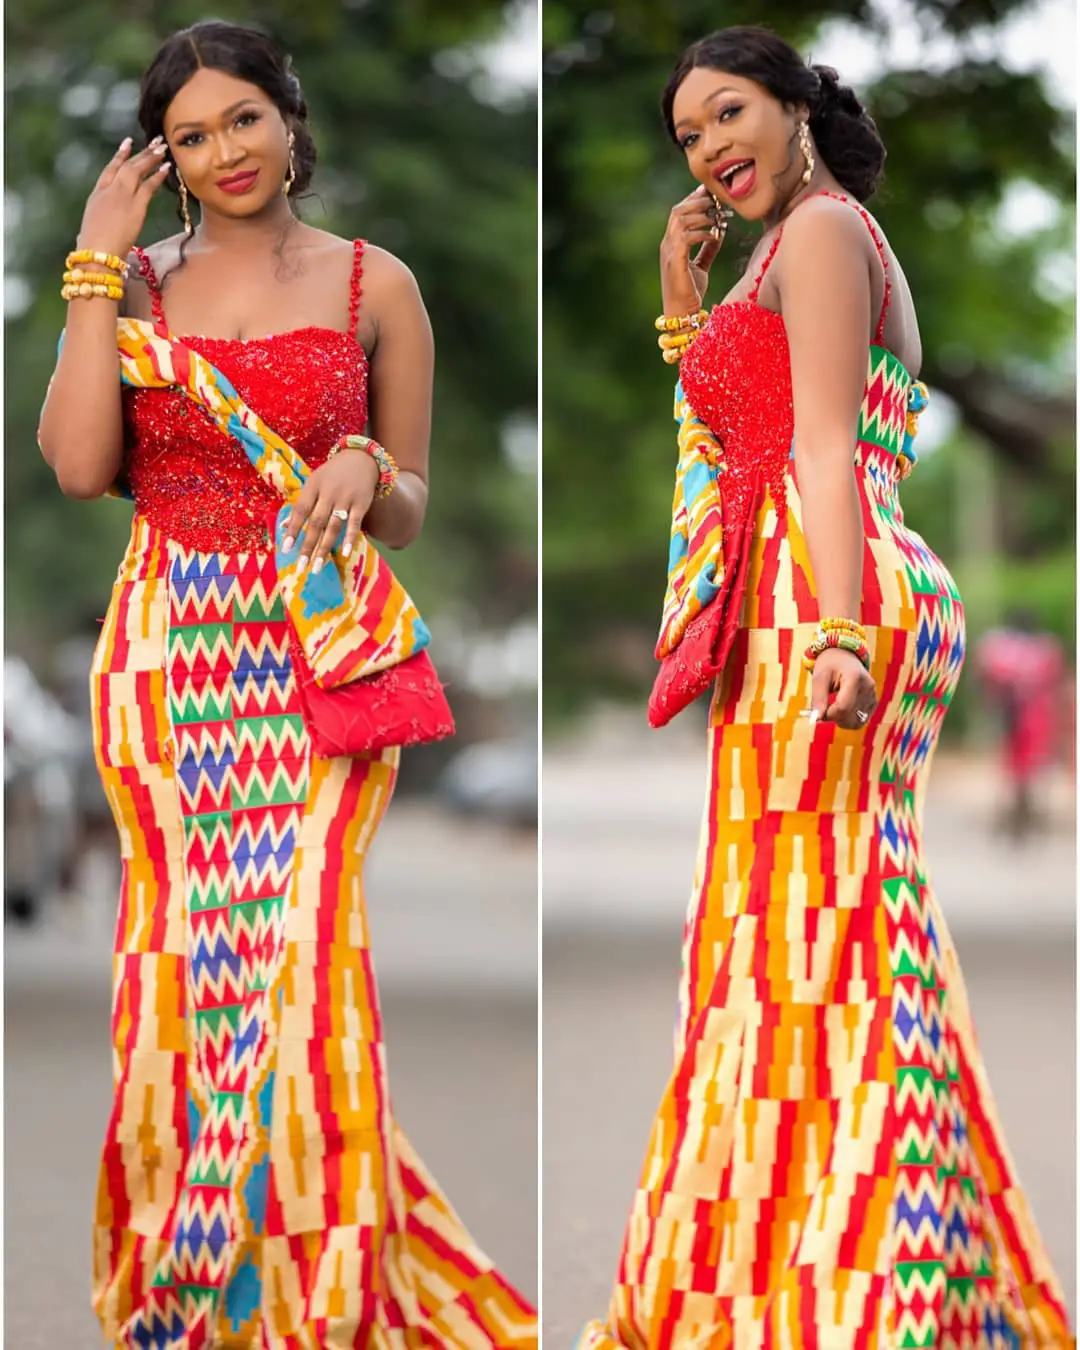 Akwaaba!! Unique Kente Style Fit For Brides!